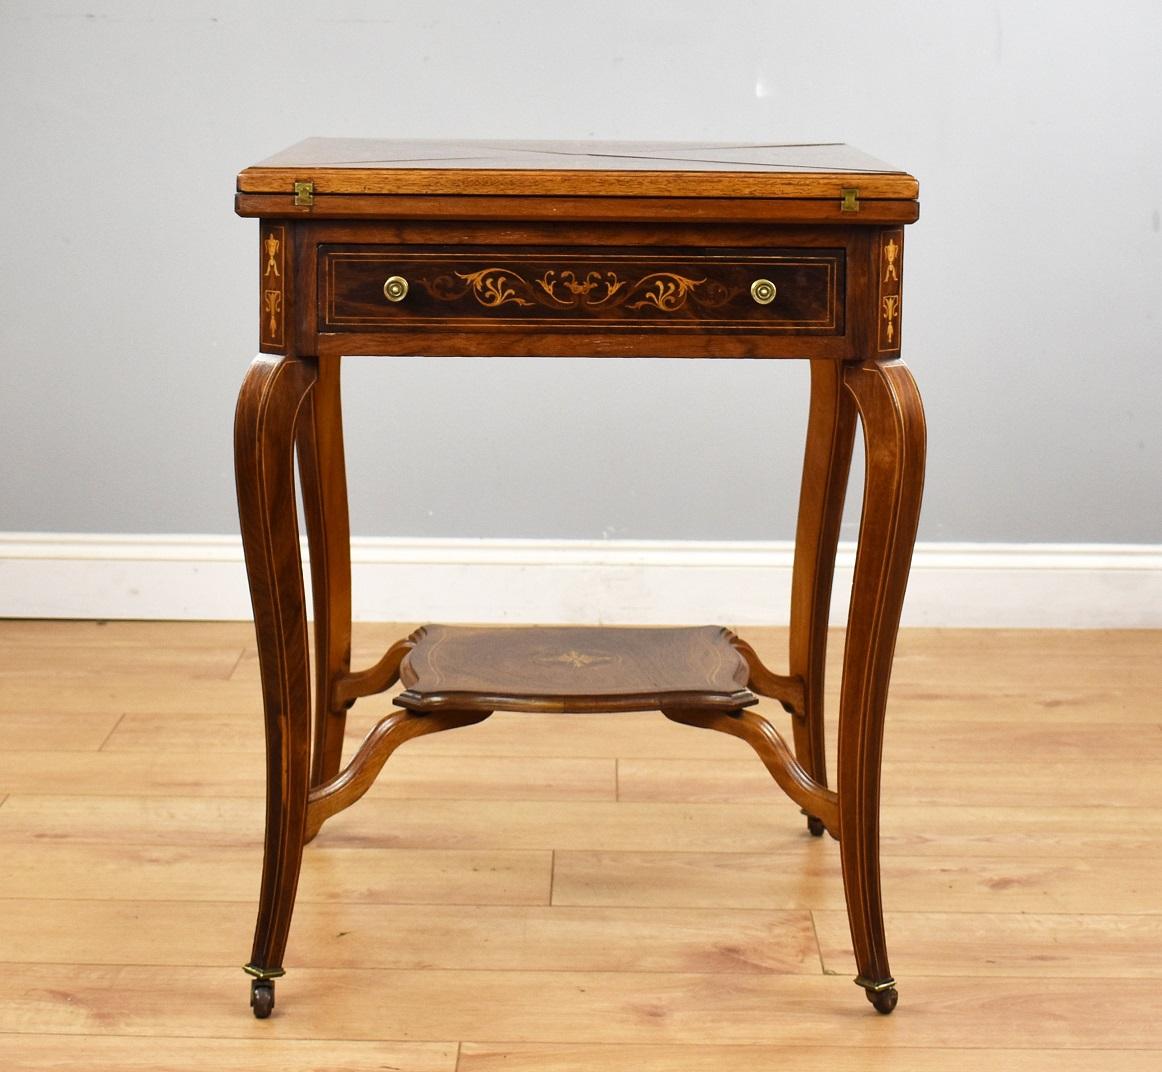 Victorian rosewood envelope card table in good condition having been polished by hand. The top has decorative inlay and swivels to open each section to reveal a green base with holders for counters or coins etc. below this it has a draw with inlay